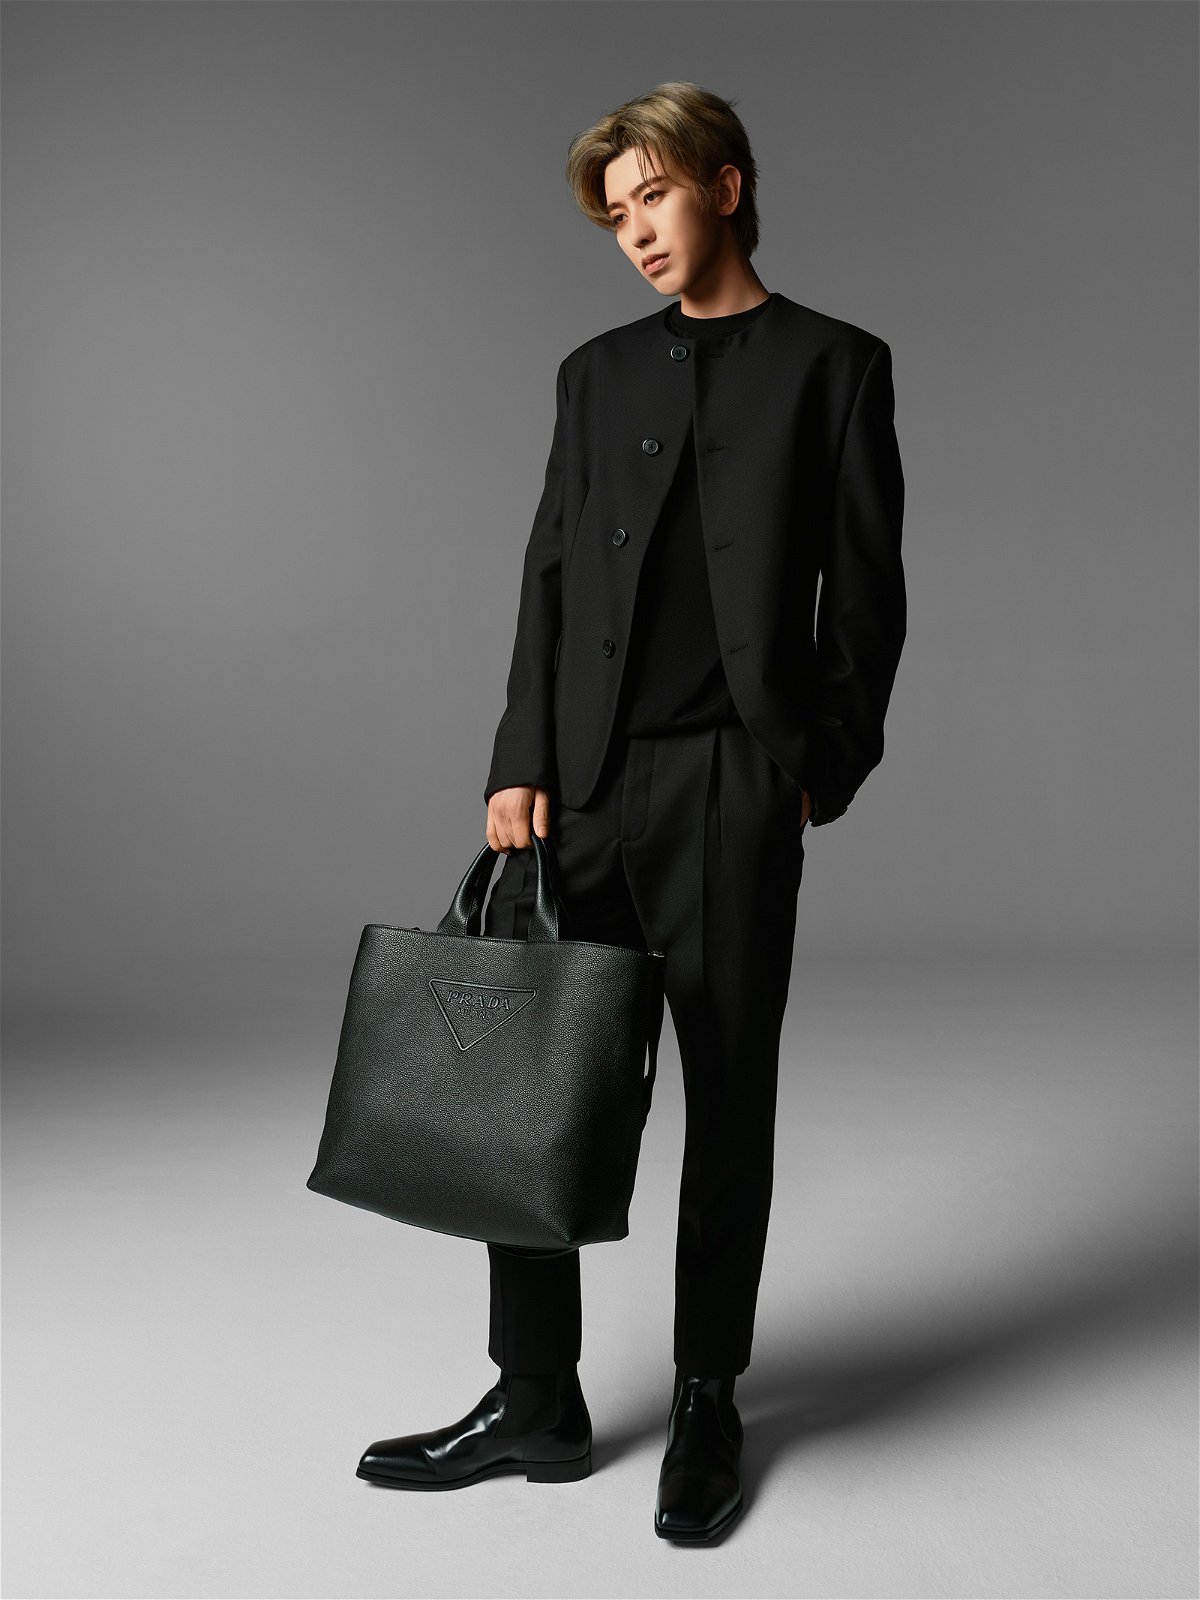 <i>Prada</i><br/>Pictured here is a promotional shot from Prada's understated Lunar New Year campaign